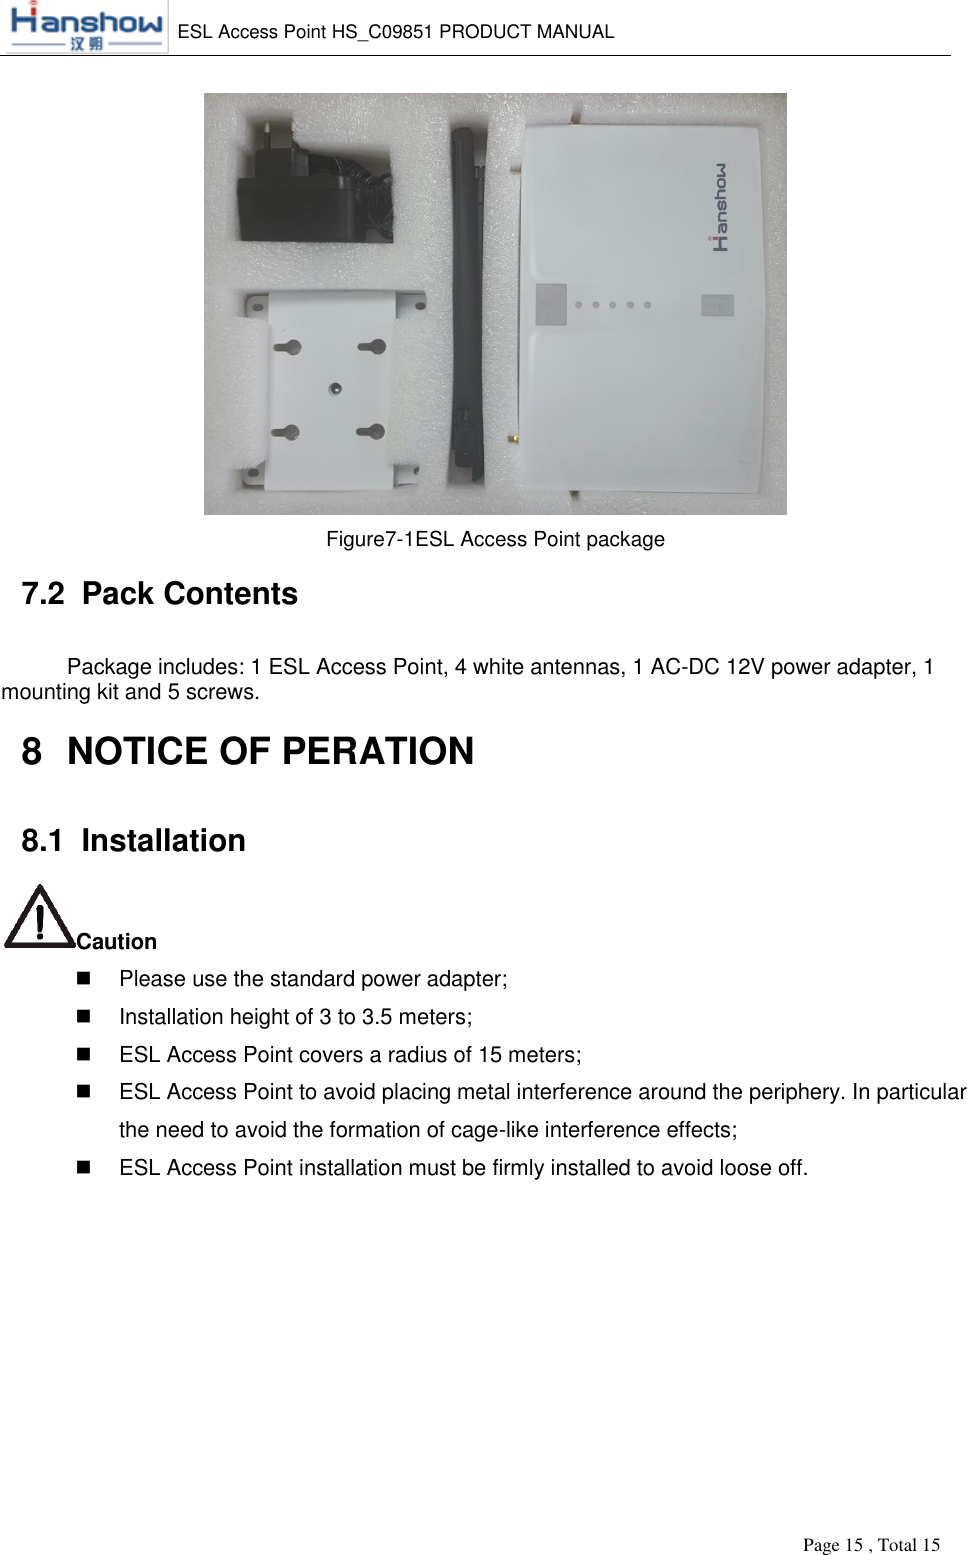    ESL Access Point HS_C09851 PRODUCT MANUAL          Page 15 , Total 15        Figure7-1ESL Access Point package 7.2  Pack Contents Package includes: 1 ESL Access Point, 4 white antennas, 1 AC-DC 12V power adapter, 1 mounting kit and 5 screws. 8  NOTICE OF PERATION 8.1  Installation Caution   Please use the standard power adapter;   Installation height of 3 to 3.5 meters;   ESL Access Point covers a radius of 15 meters;   ESL Access Point to avoid placing metal interference around the periphery. In particular the need to avoid the formation of cage-like interference effects;   ESL Access Point installation must be firmly installed to avoid loose off. 